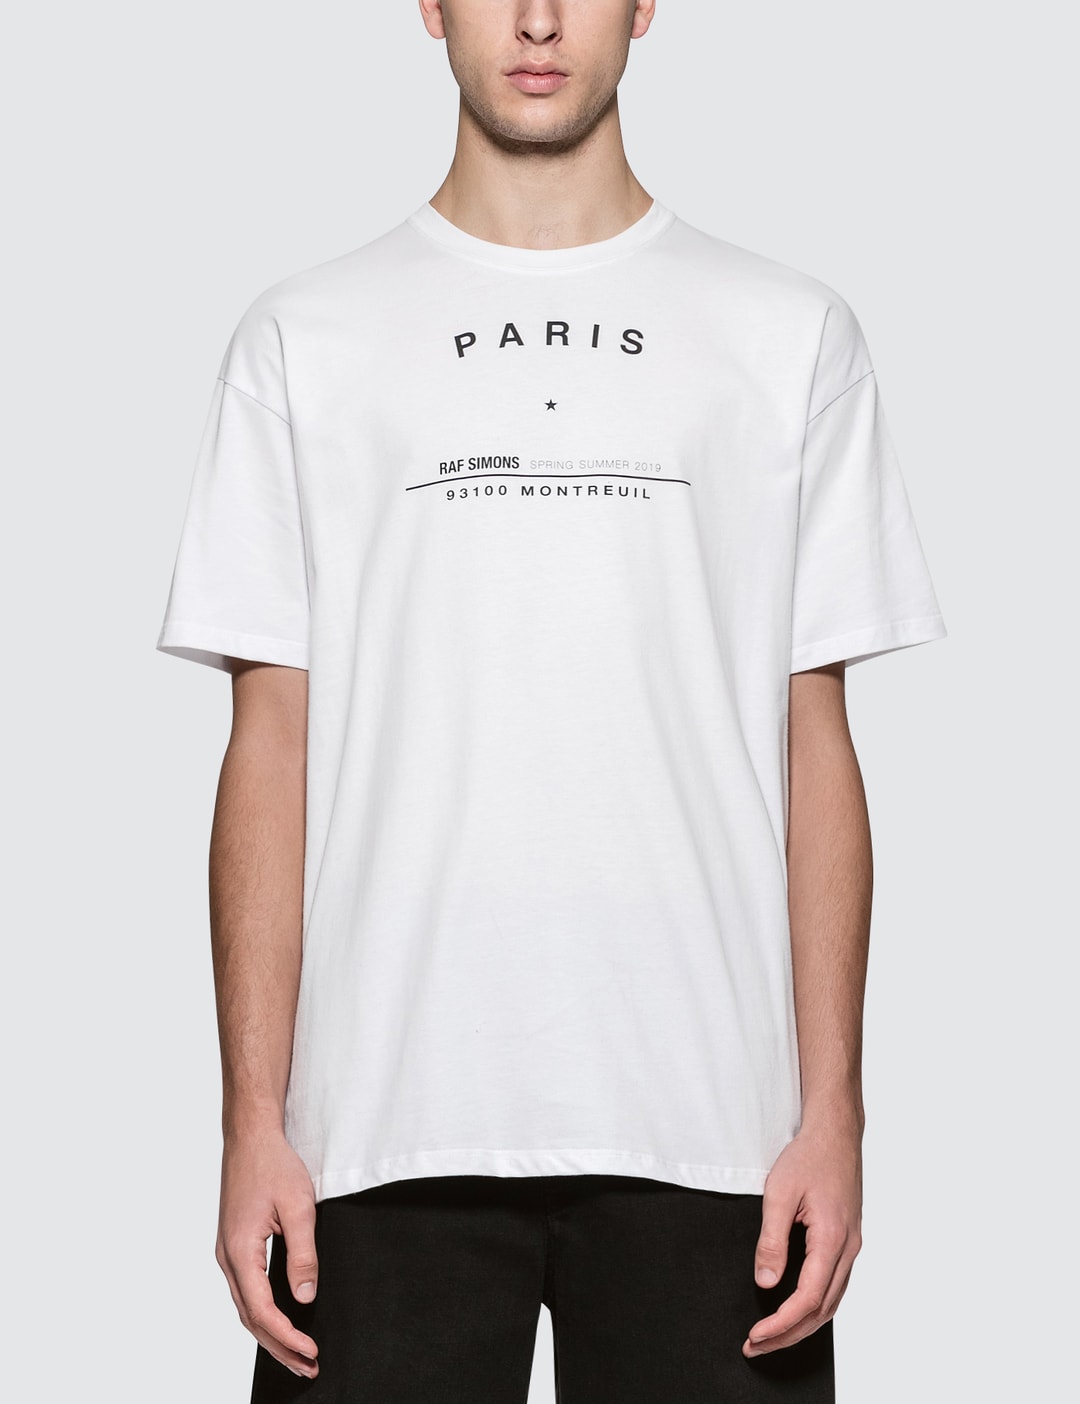 røre ved Postkort smukke Raf Simons - Tour T-Shirt | HBX - Globally Curated Fashion and Lifestyle by  Hypebeast